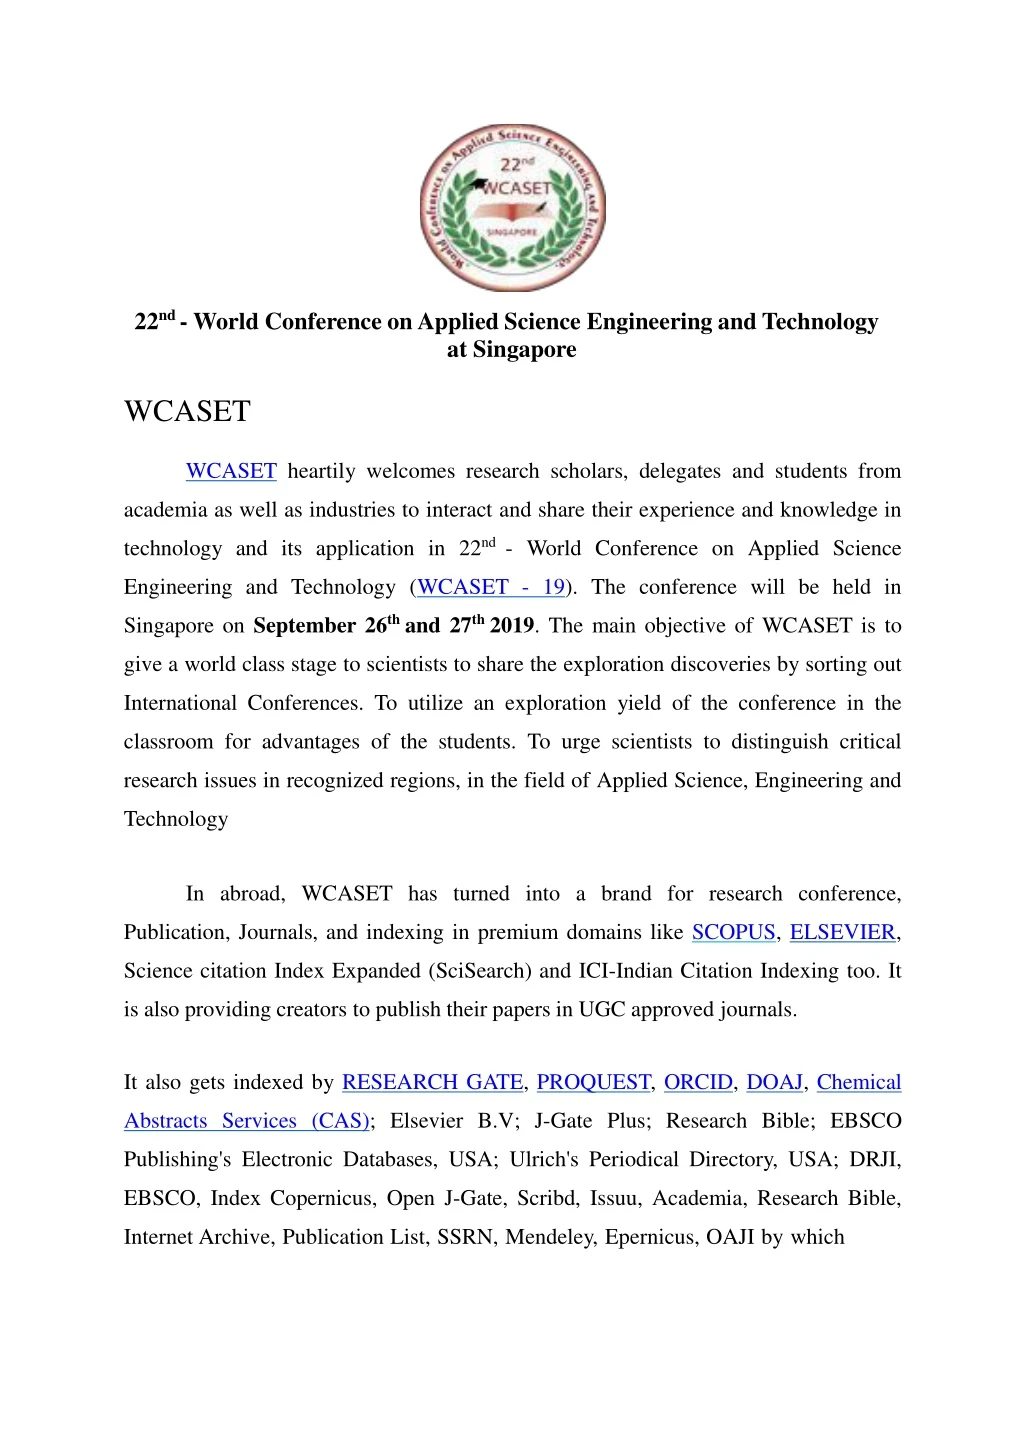 22 nd world conference on applied science